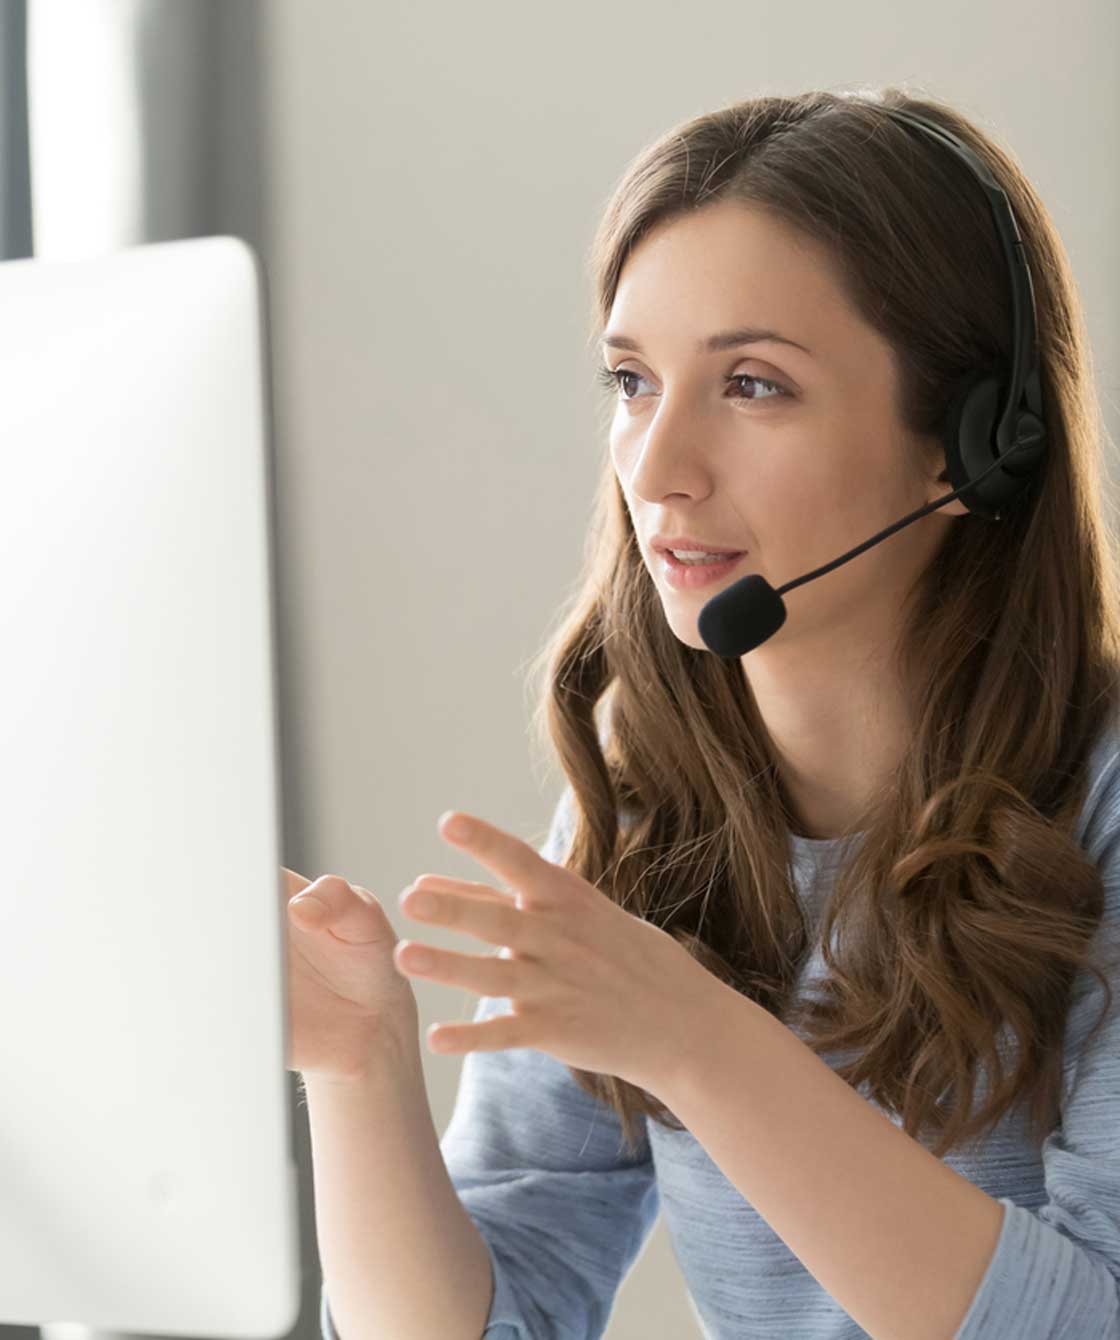 Customer service person talking on a headset while on a computer